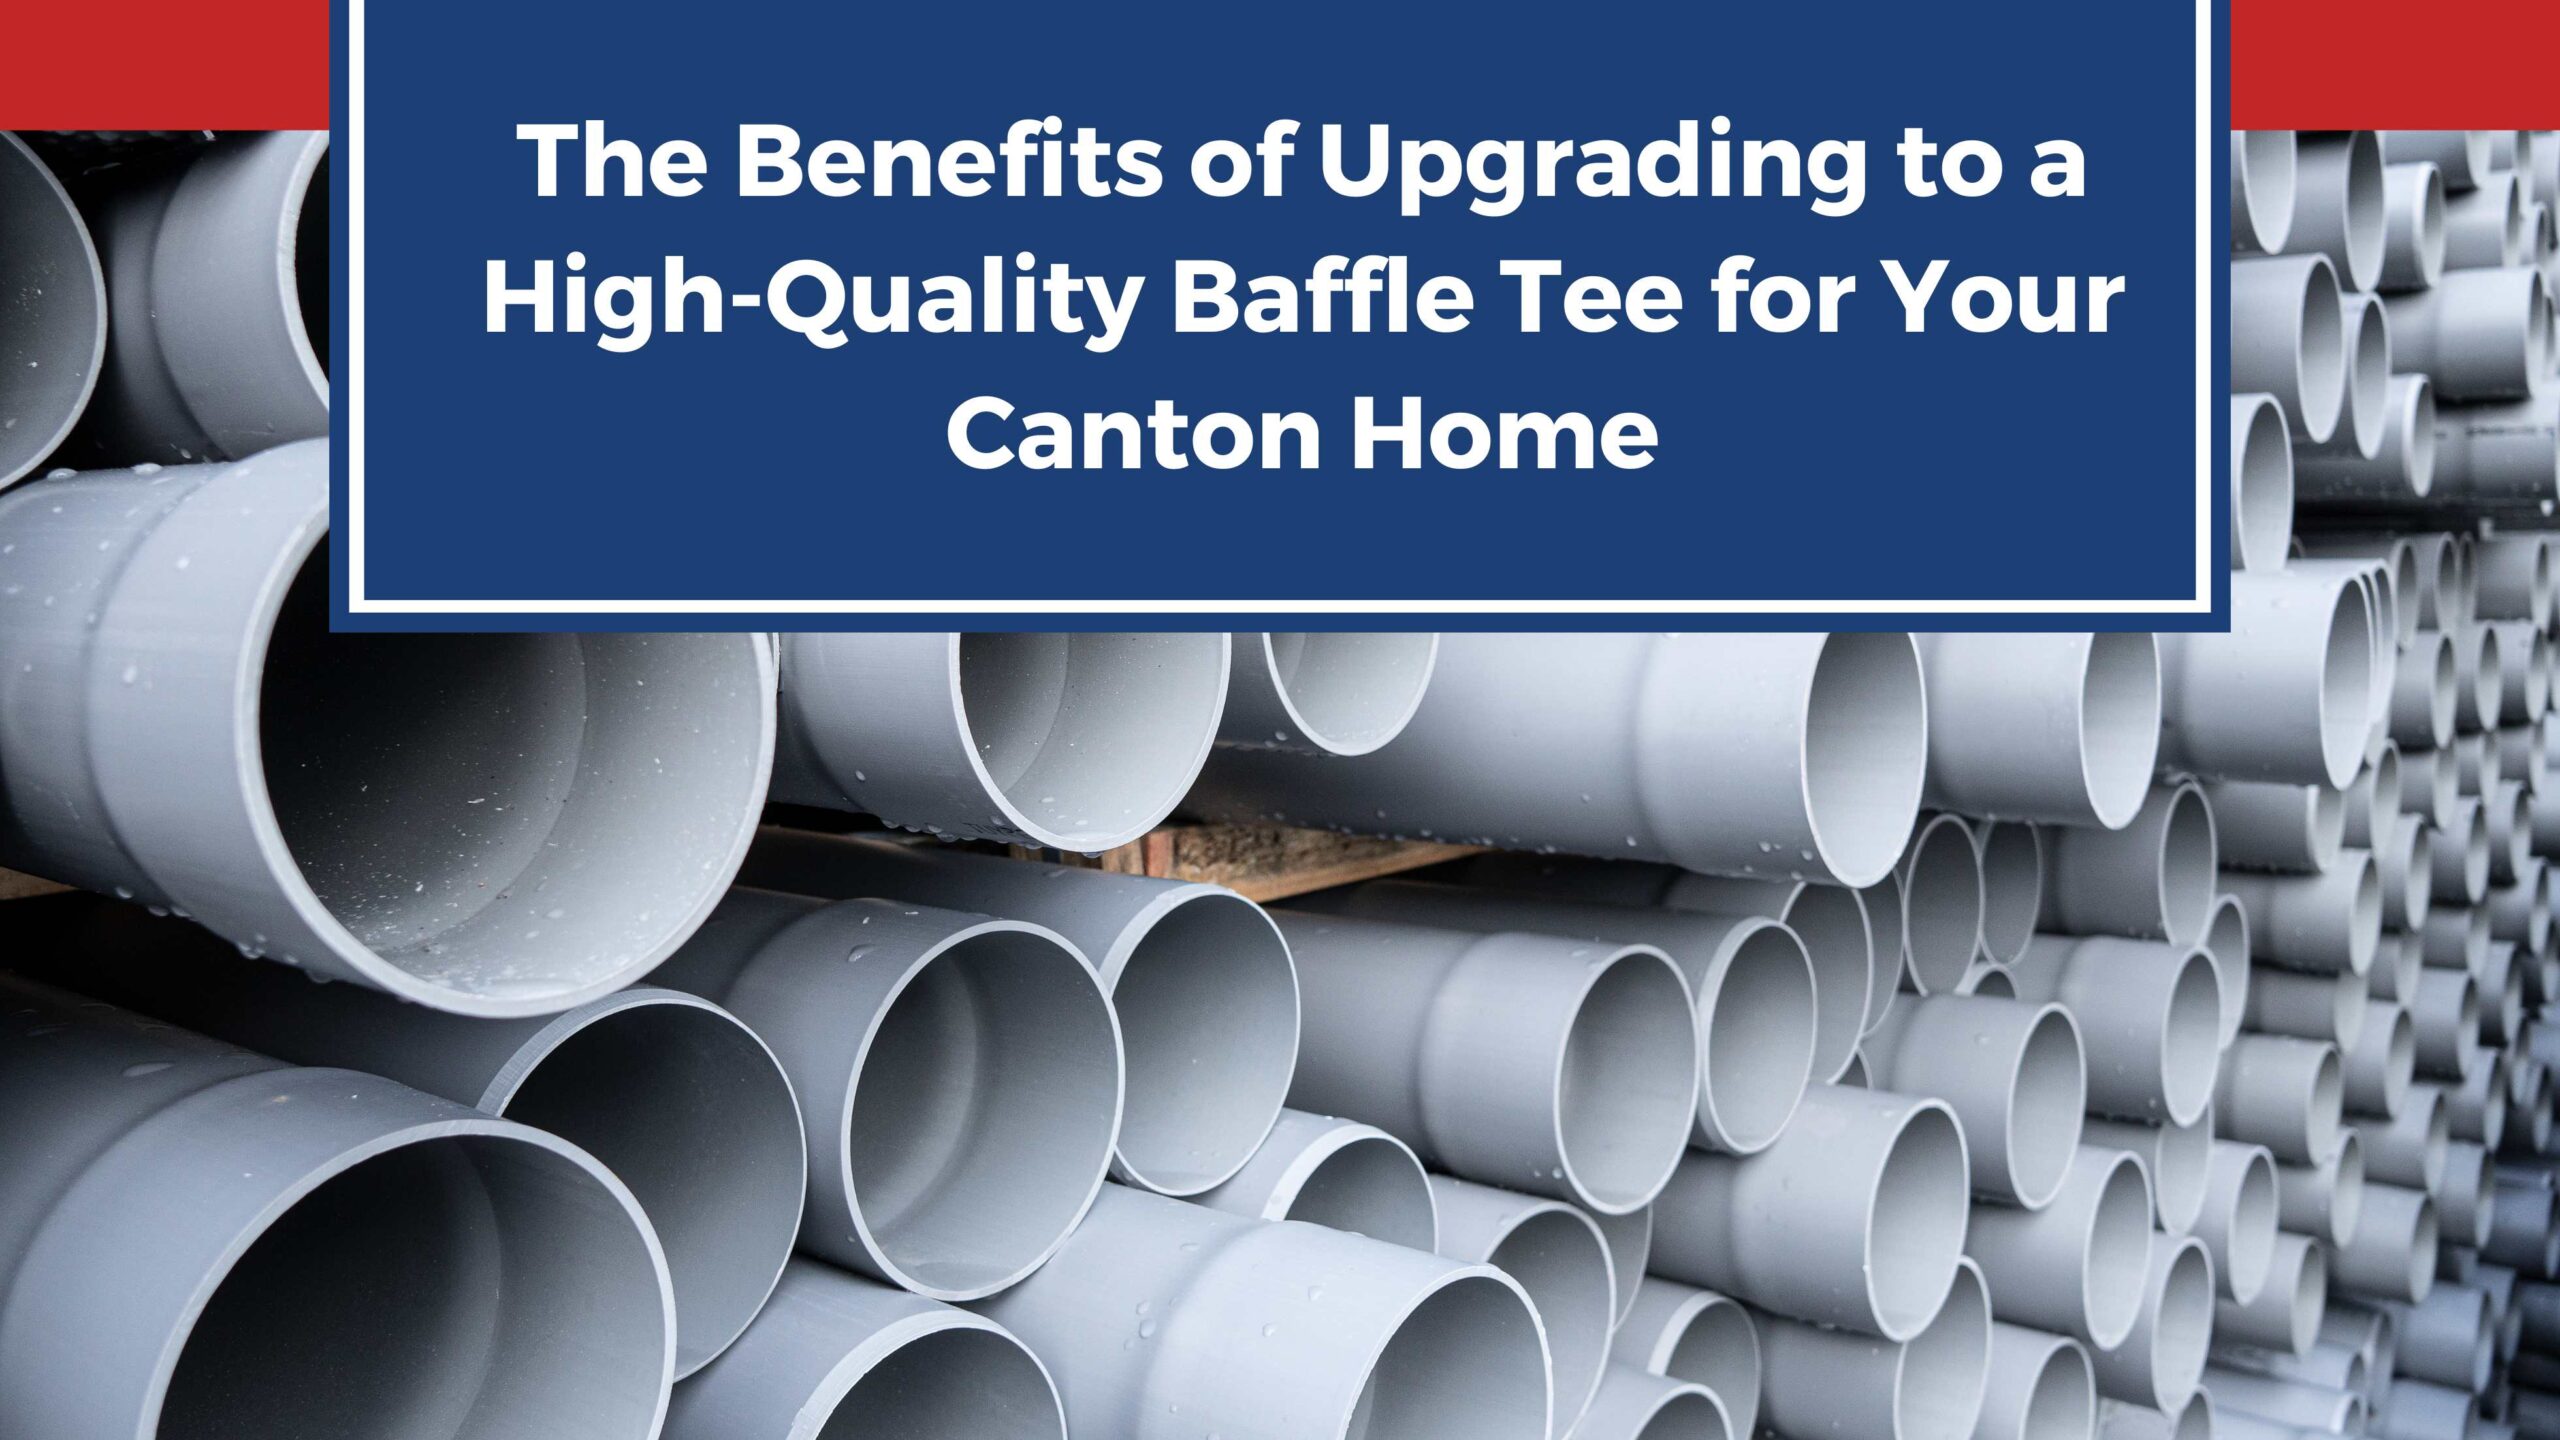 The Benefits of Upgrading to a High-Quality Baffle Tee for Your Canton Home